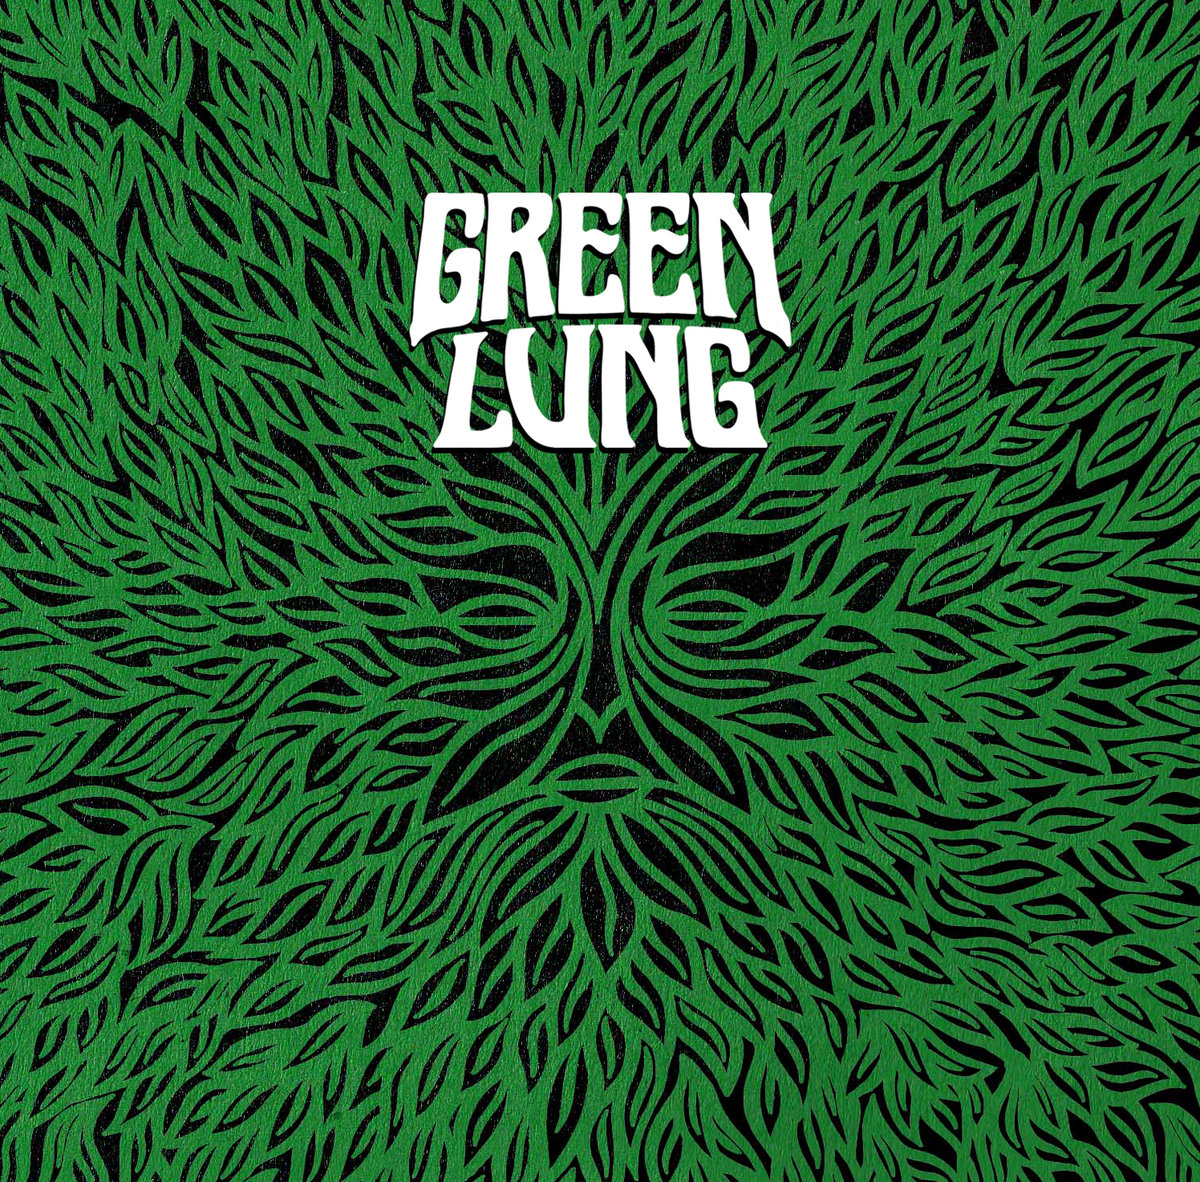 GREEN LUNG - Green Man Rising (Demo) cover 